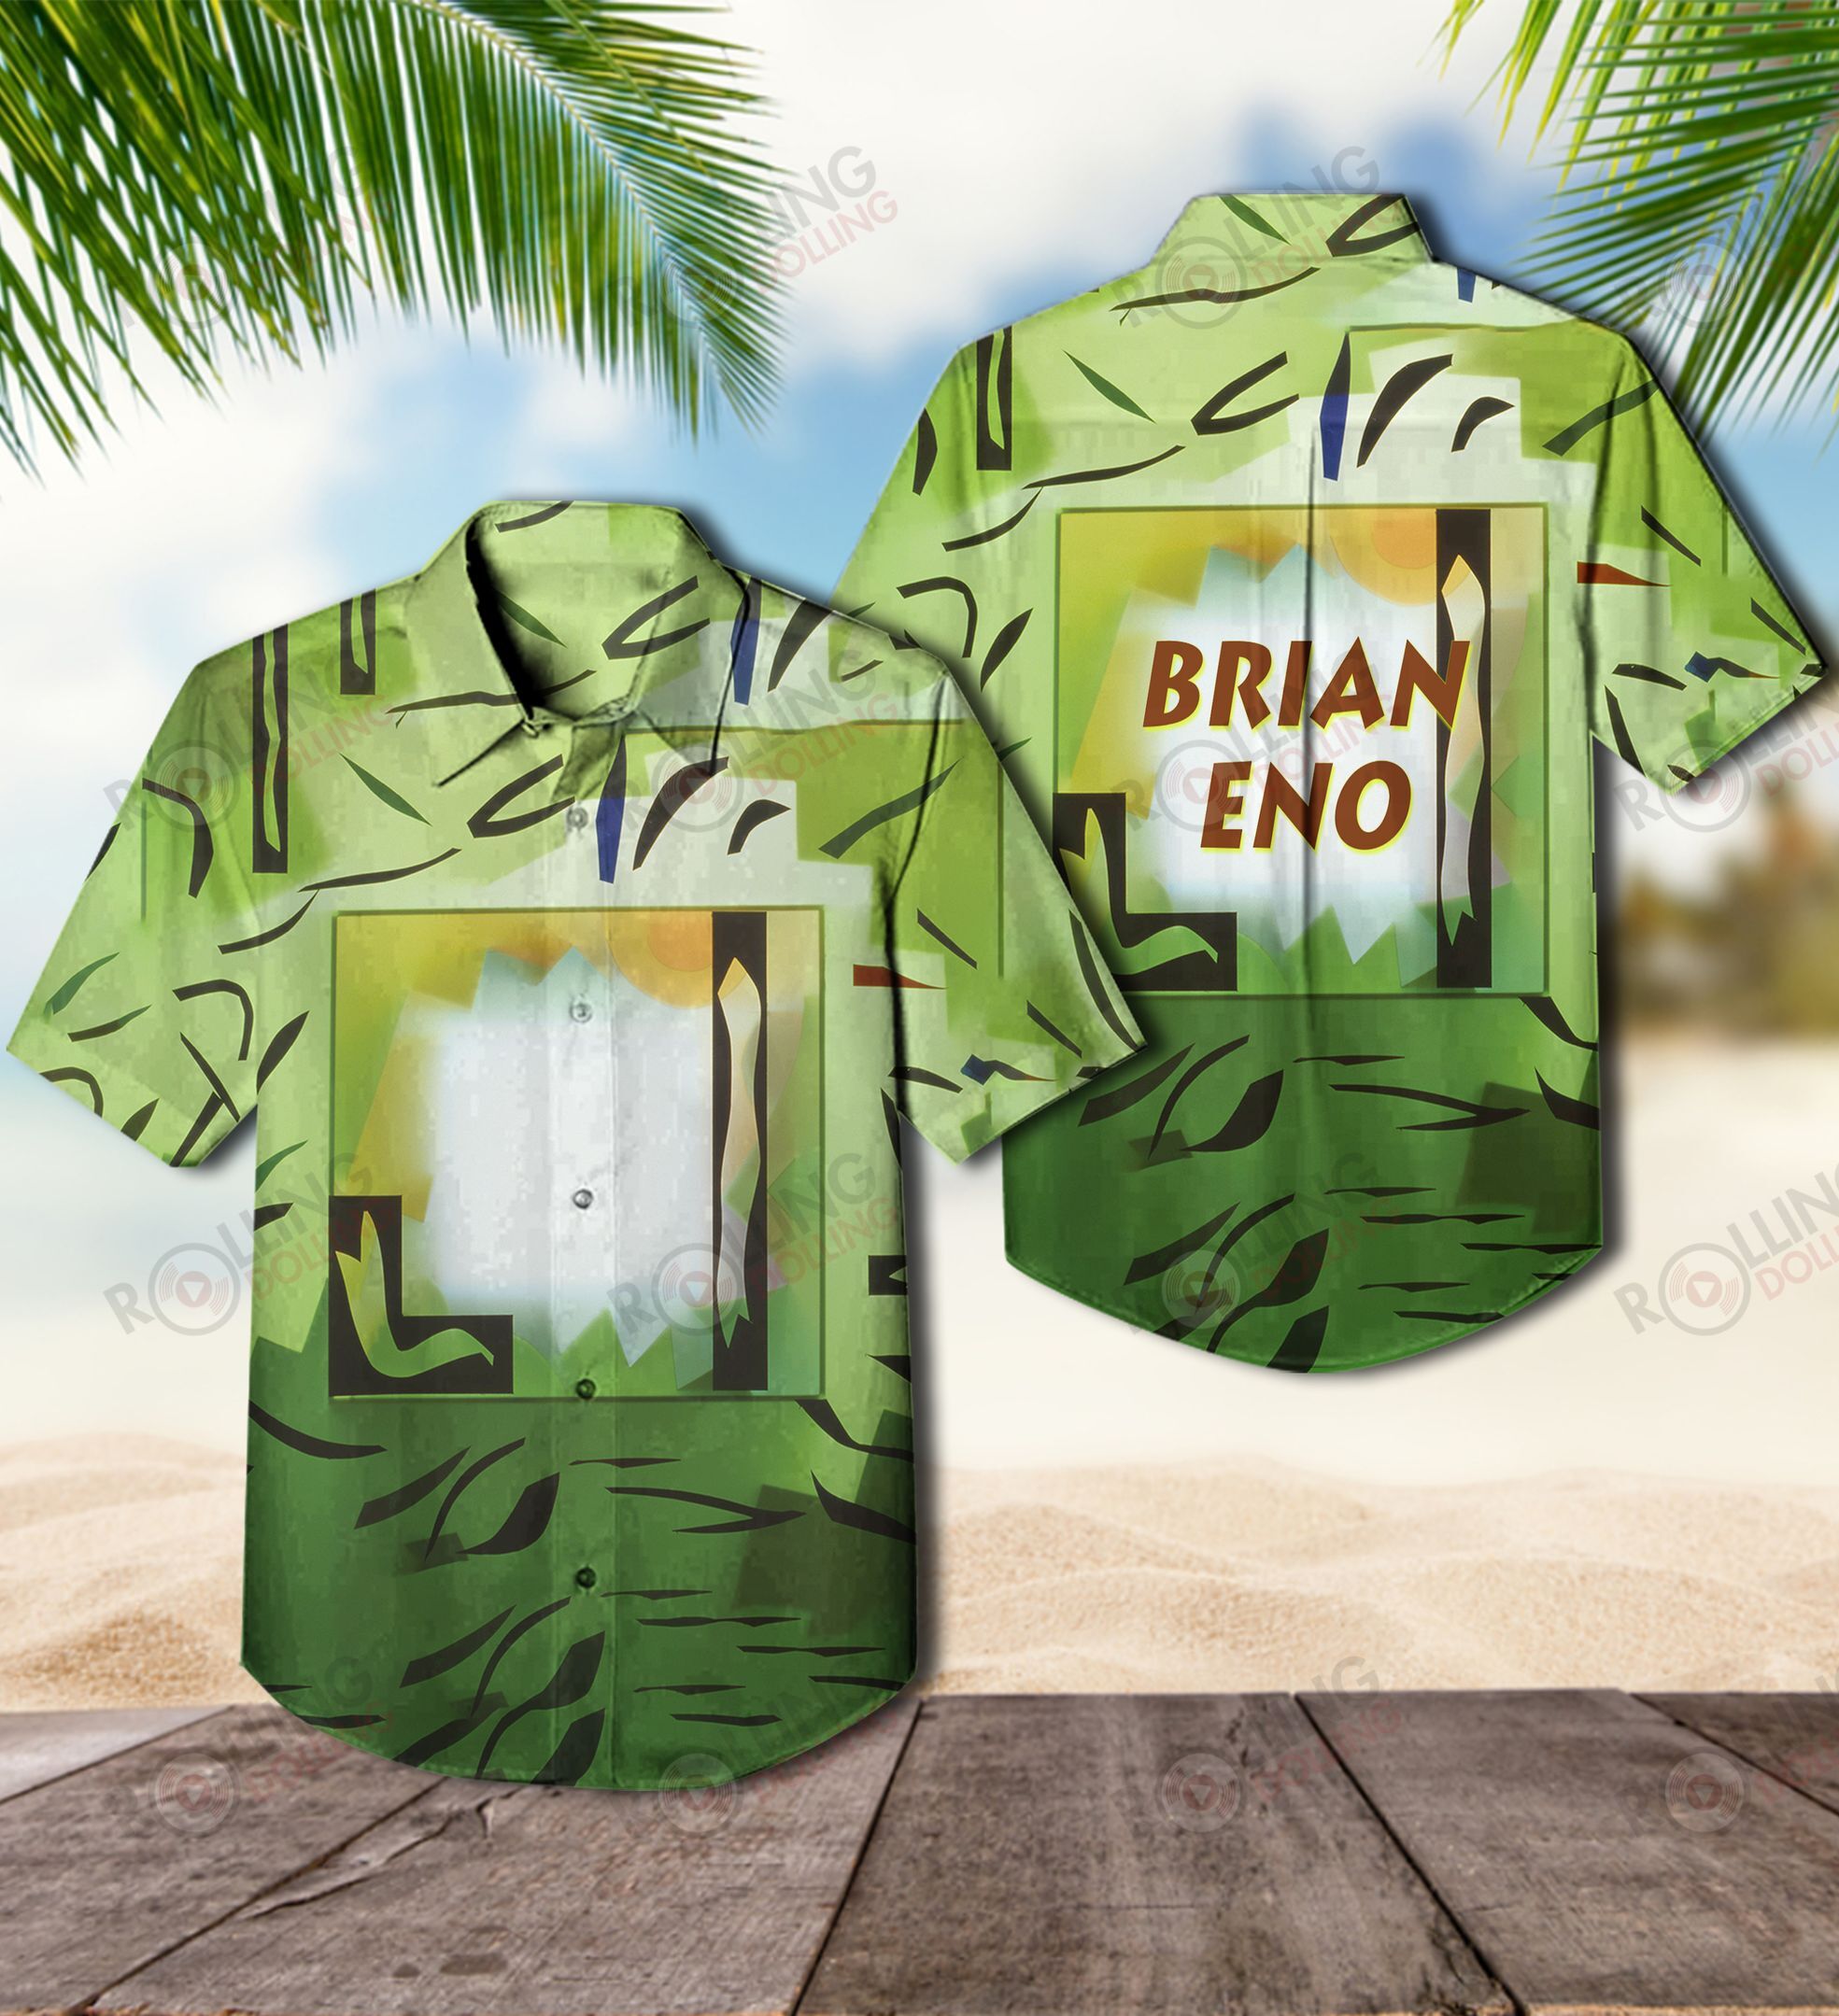 For summer, consider wearing This Amazing Hawaiian Shirt shirt in our store 158